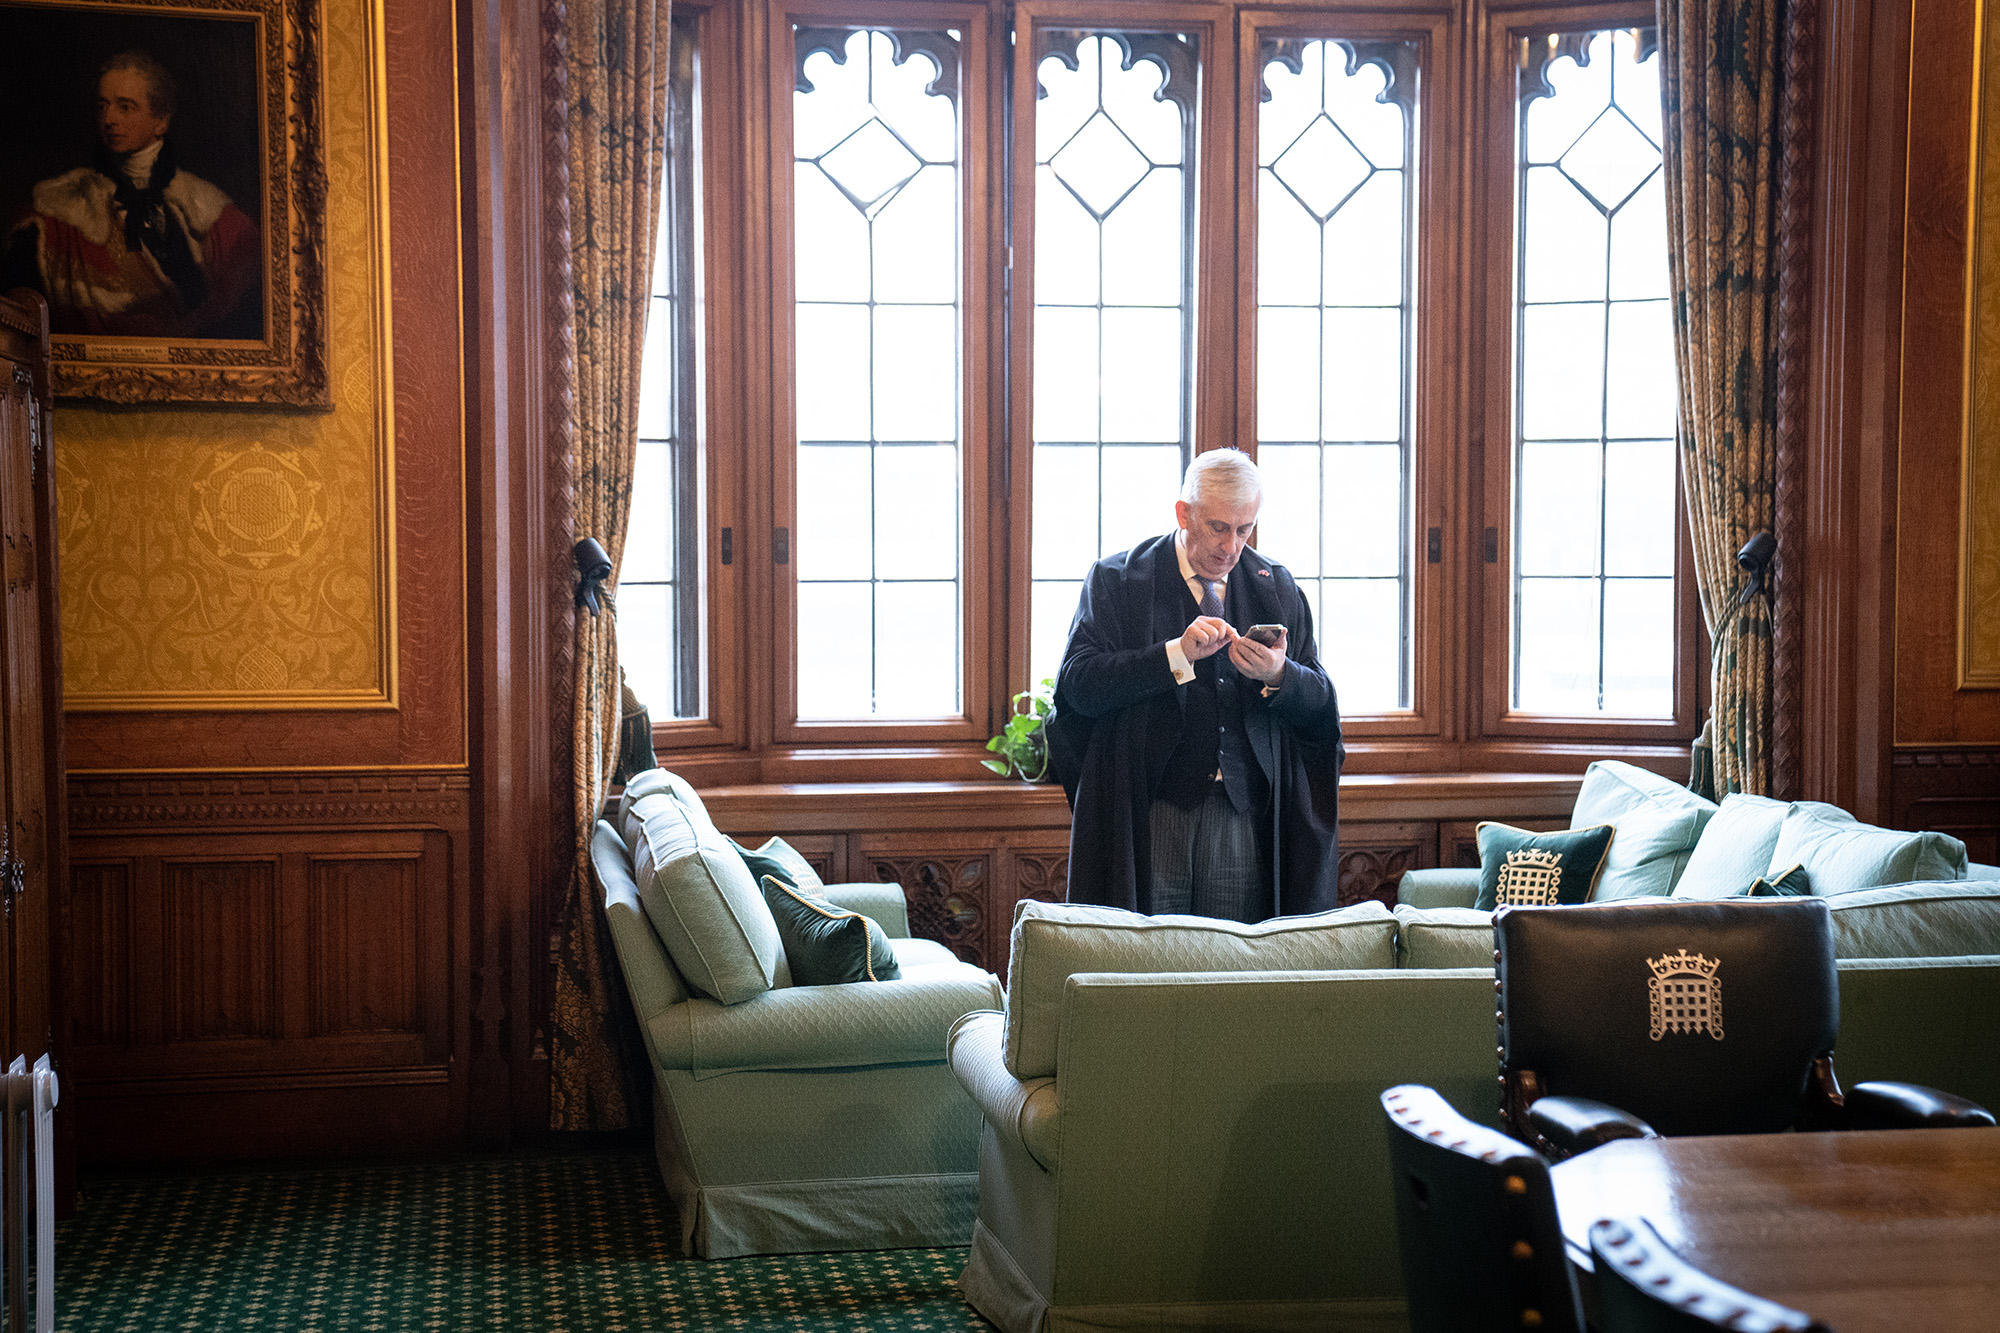 Speaker of the House of Commons Sir Lindsay Hoyle uses a mobile phone in his office in the Palace of Westminster, London, on February 21, 2022. Sir Hoyle is one of the 287 members of the British Parliament that Russia has sanctioned.